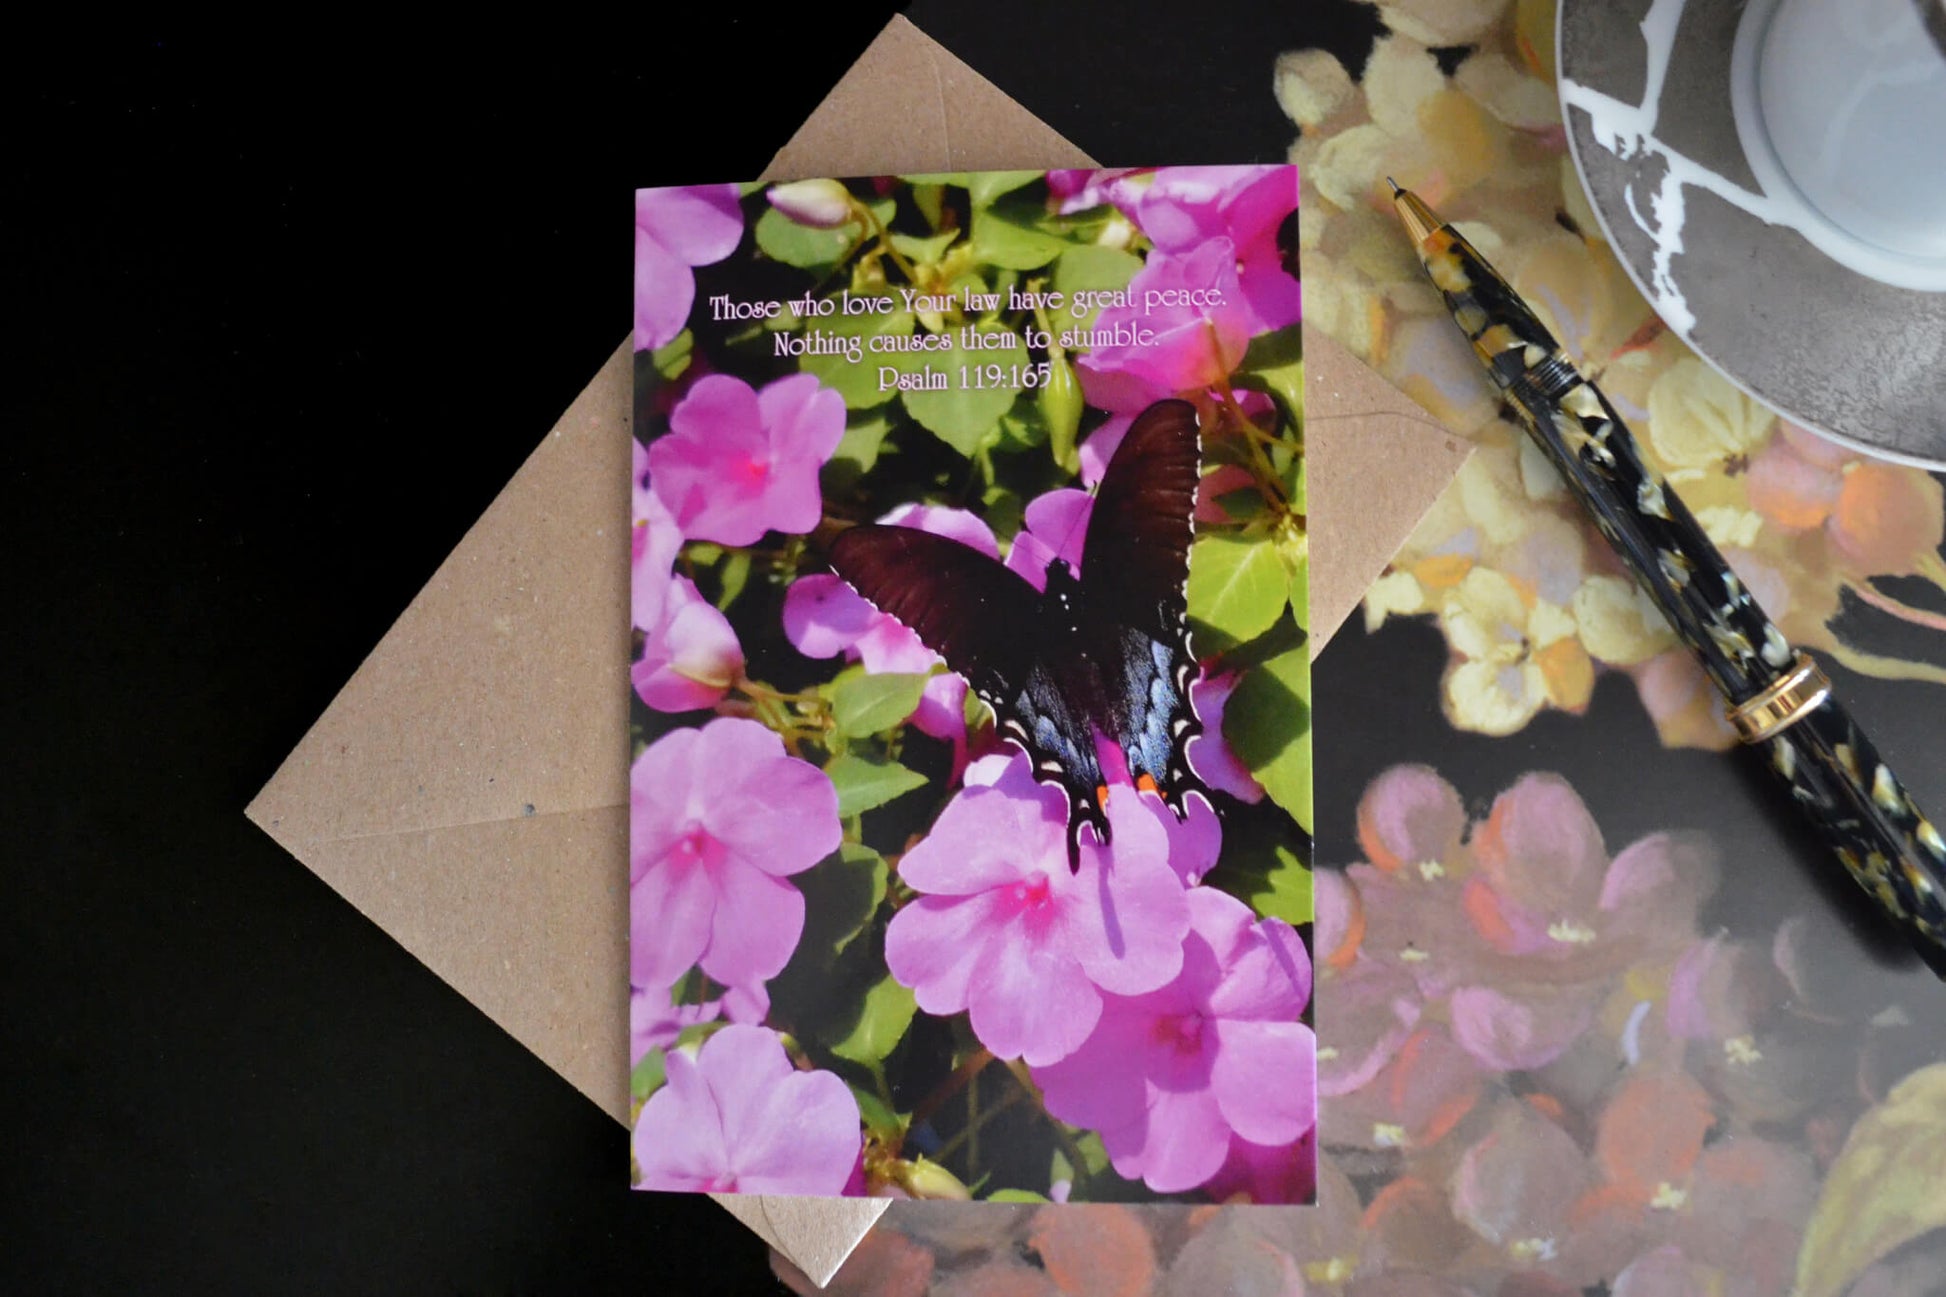 Psalm 119:165 Butterfly on Impatiens eco Christian greeting card